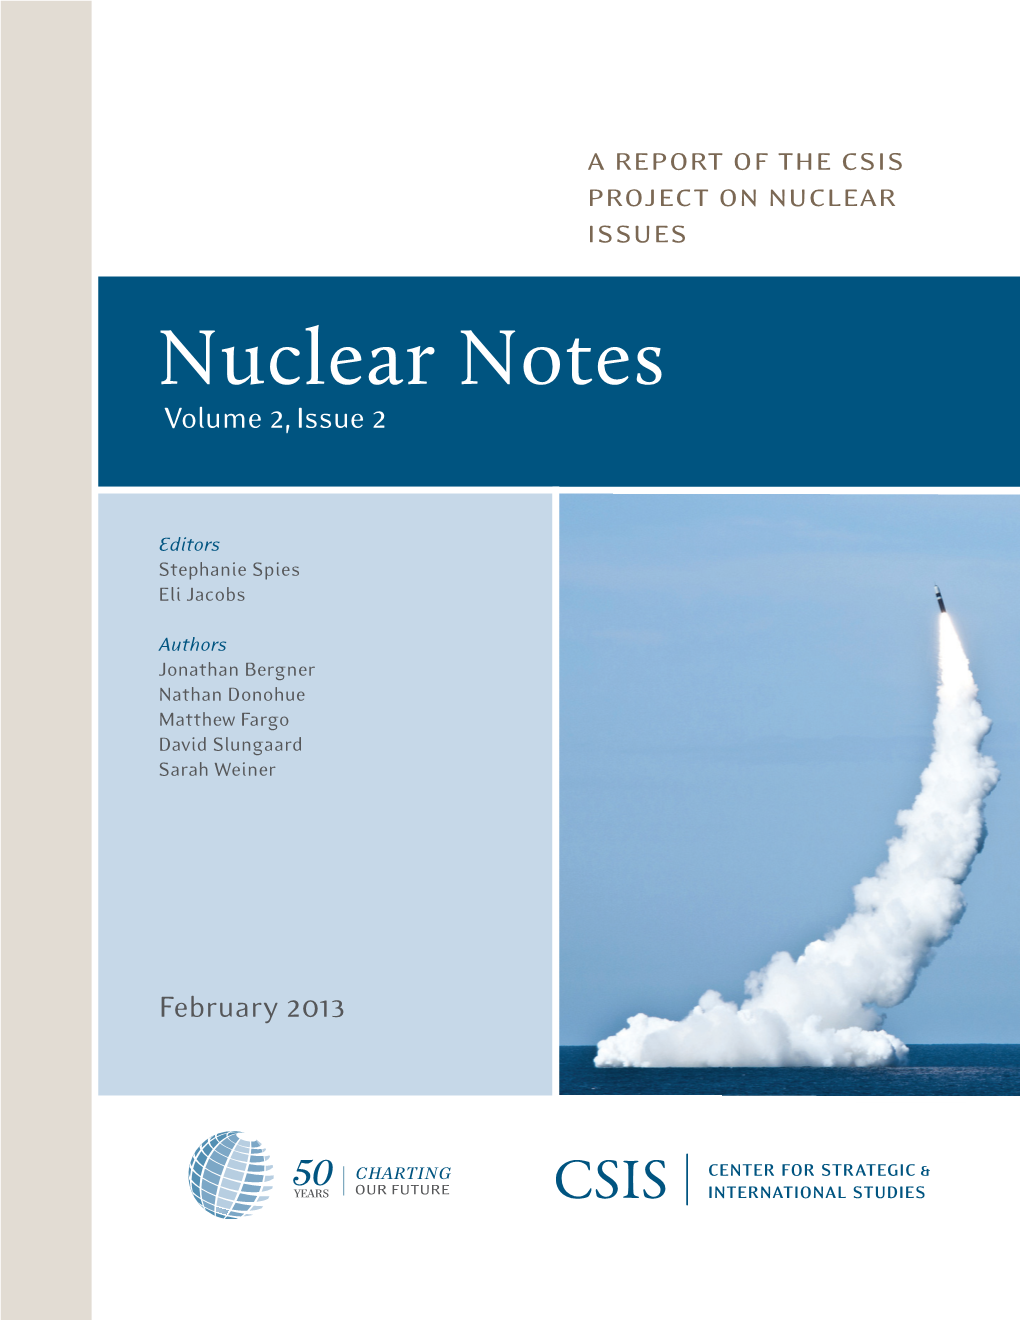 Nuclear Notes Volume 2, Issue 2